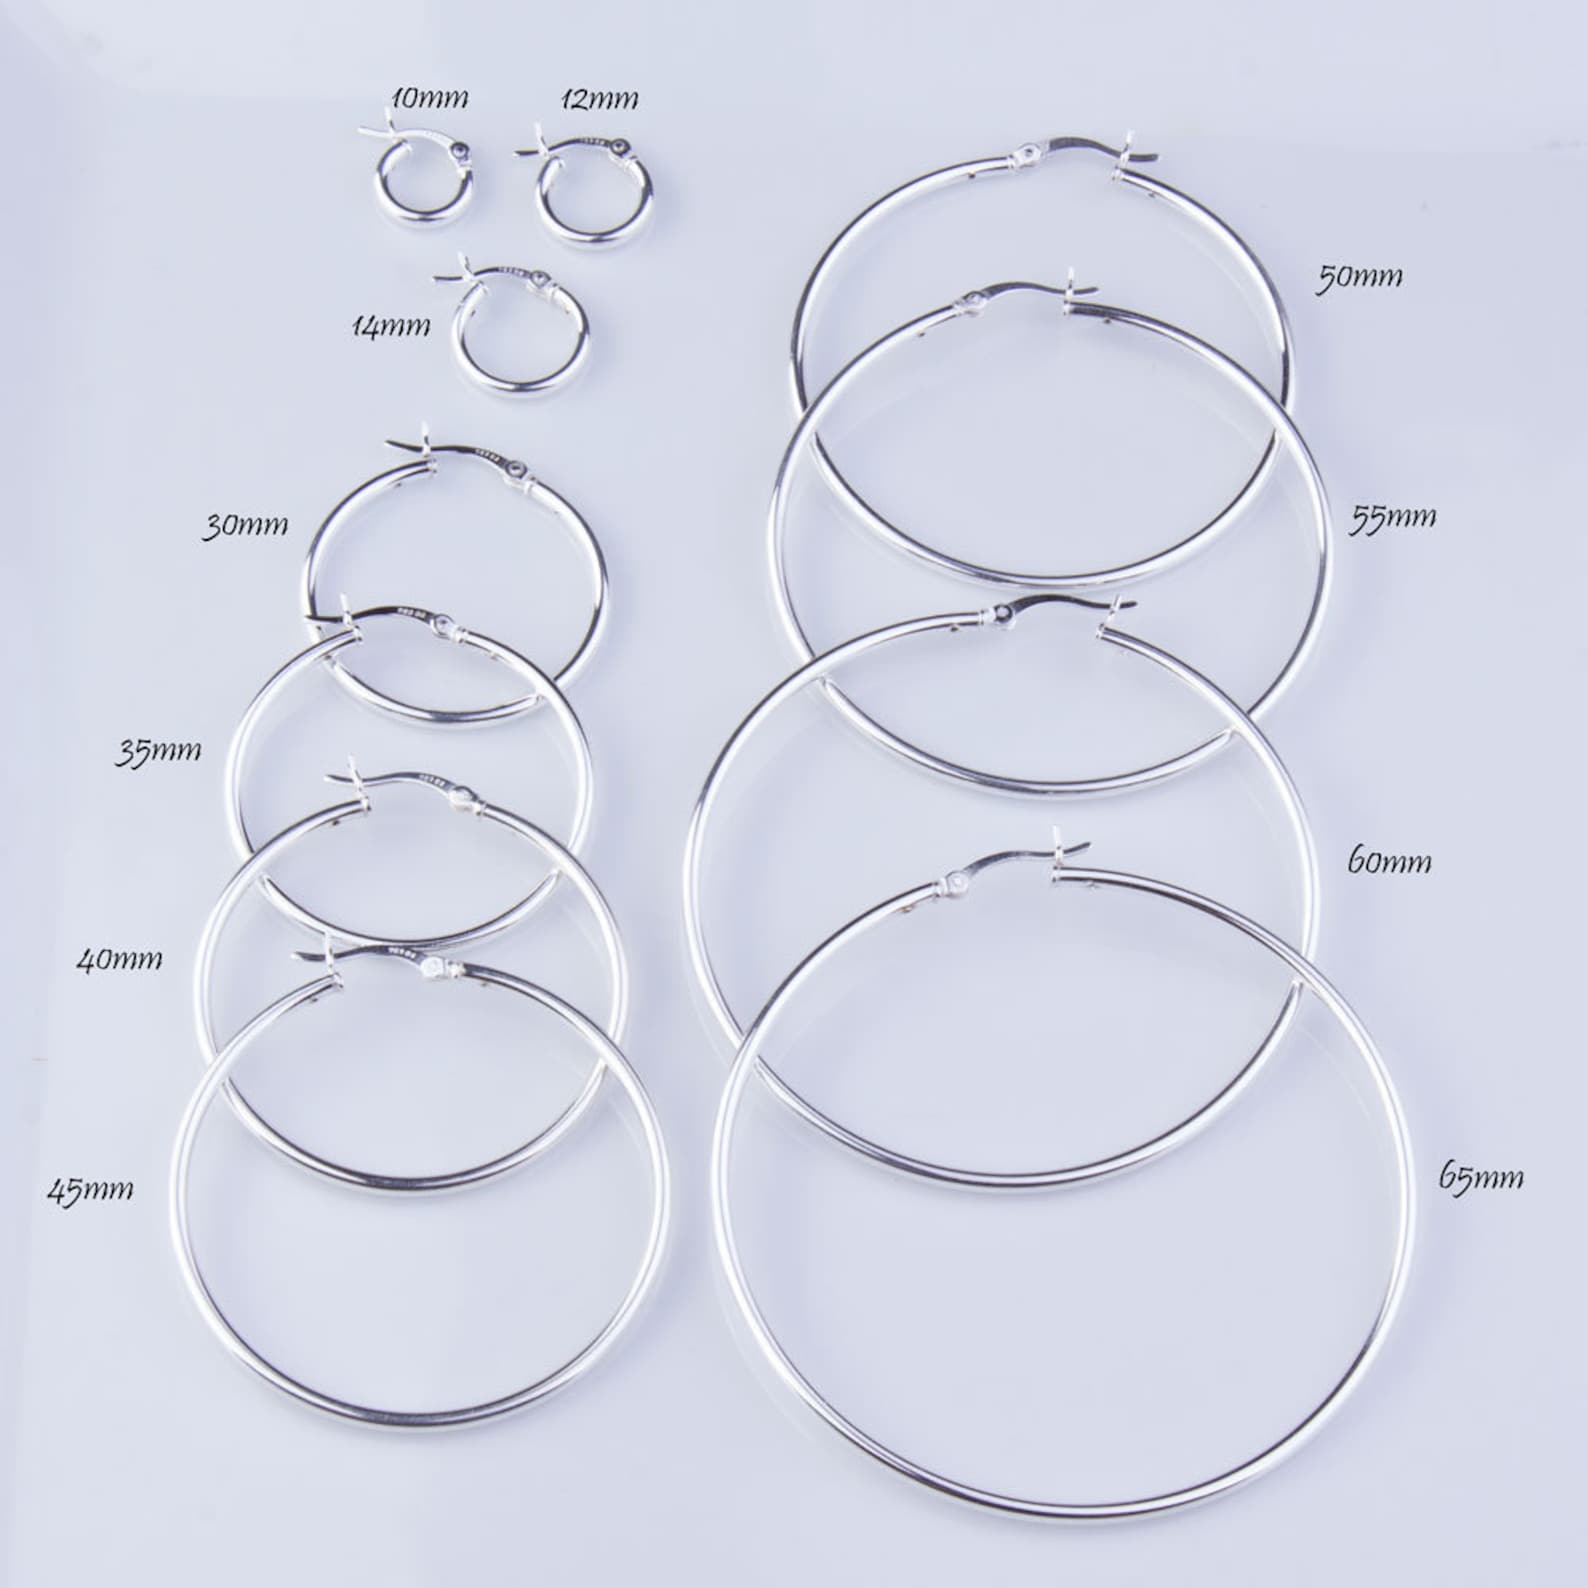 Hoop Earring Size Chart In Inches